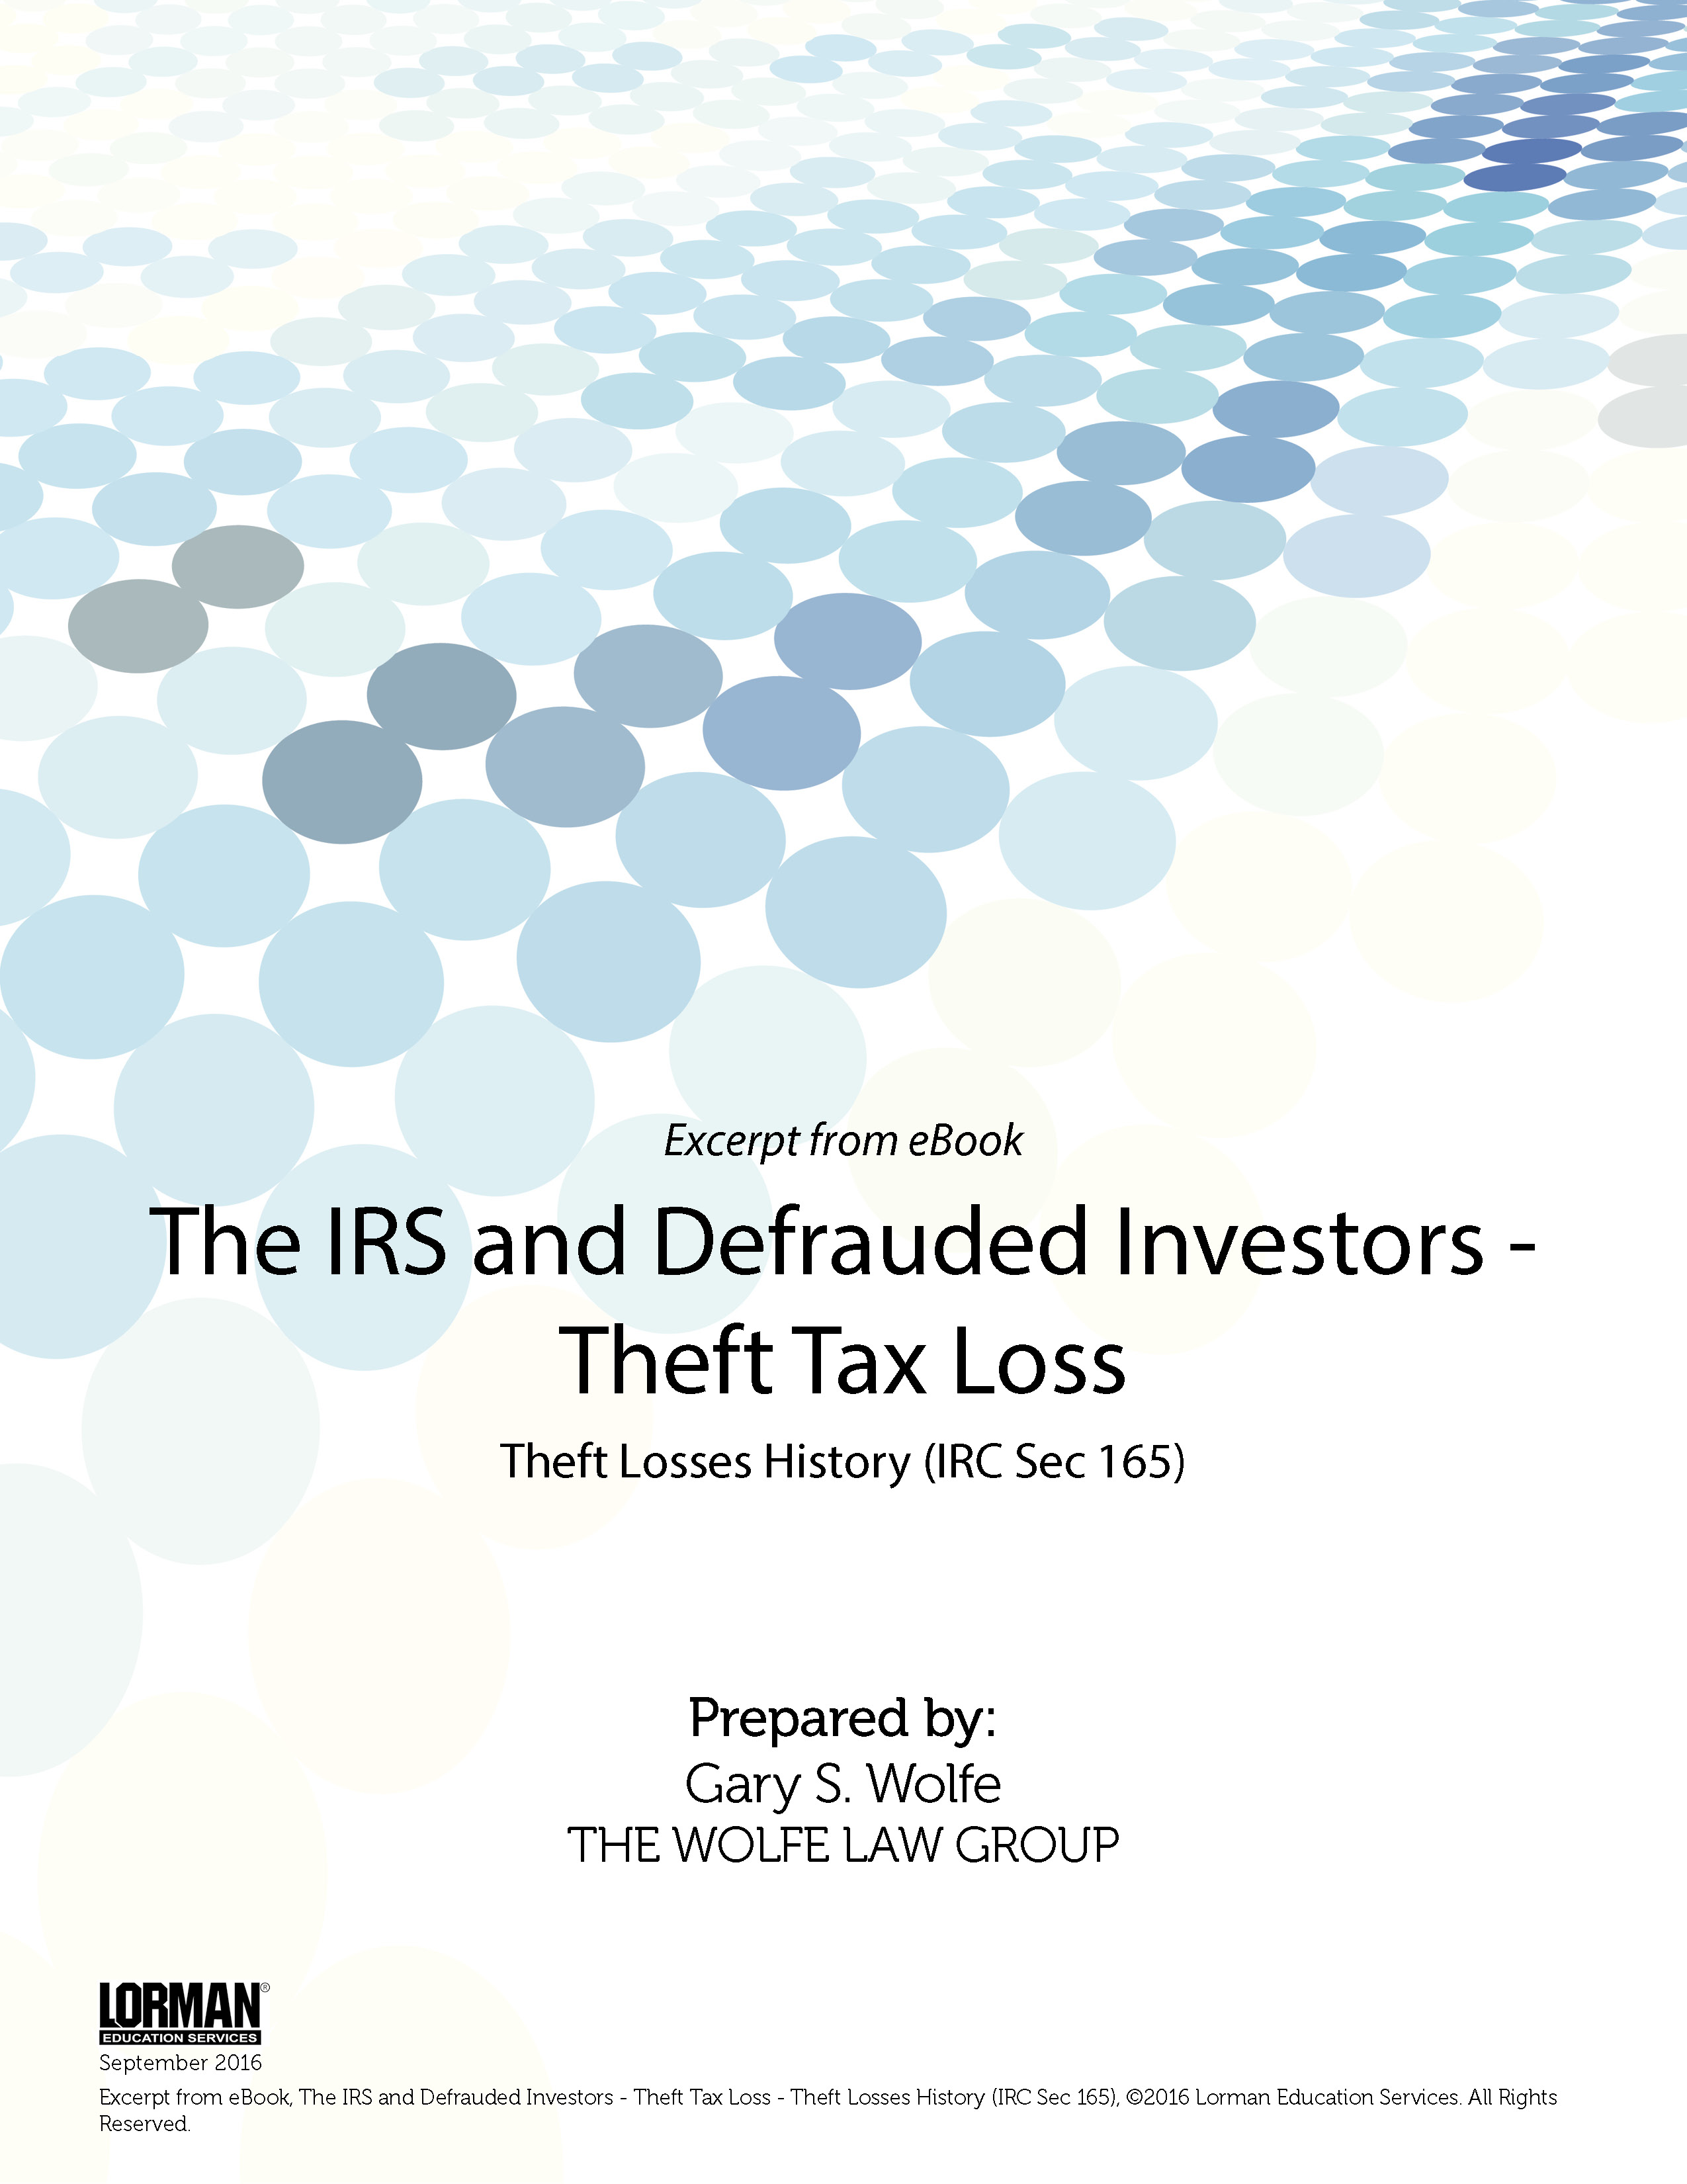 The IRS and Defrauded Investors: Theft Tax Loss - Theft Losses History (IRC Sec 165)